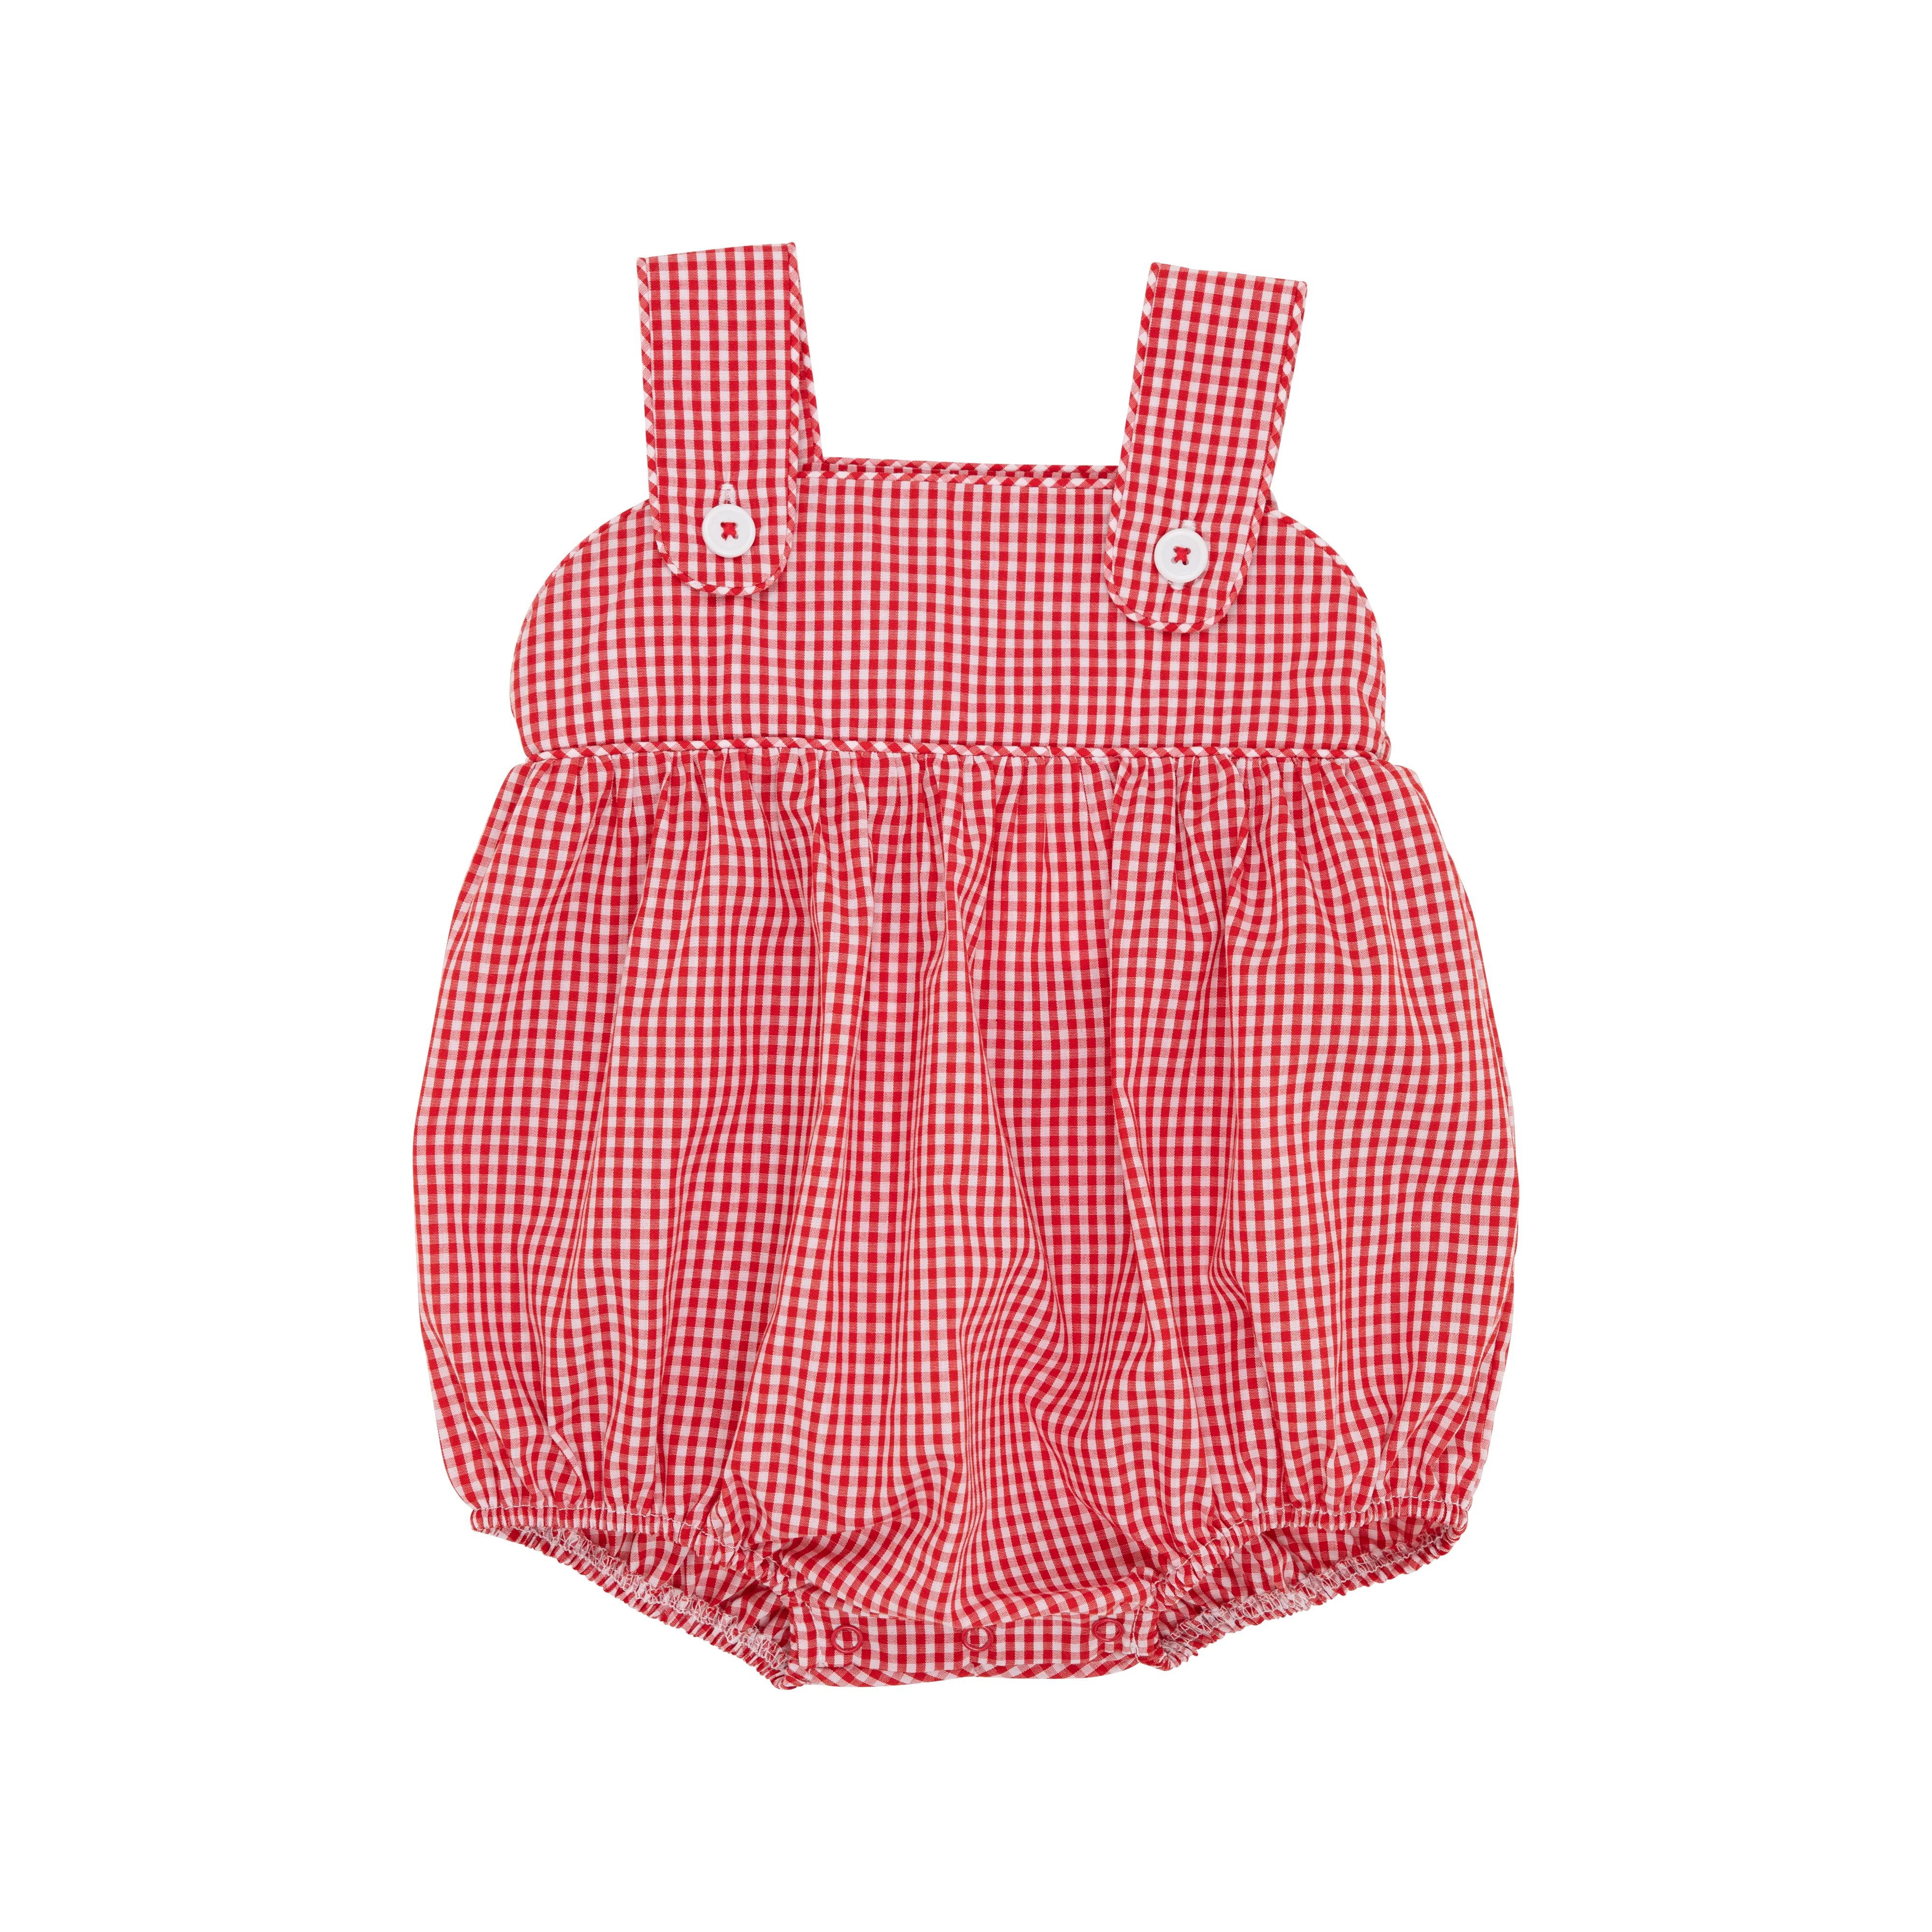 Bingham Bubble - Richmond Red Mini Gingham with Worth Avenue White Buttons | The Beaufort Bonnet Company